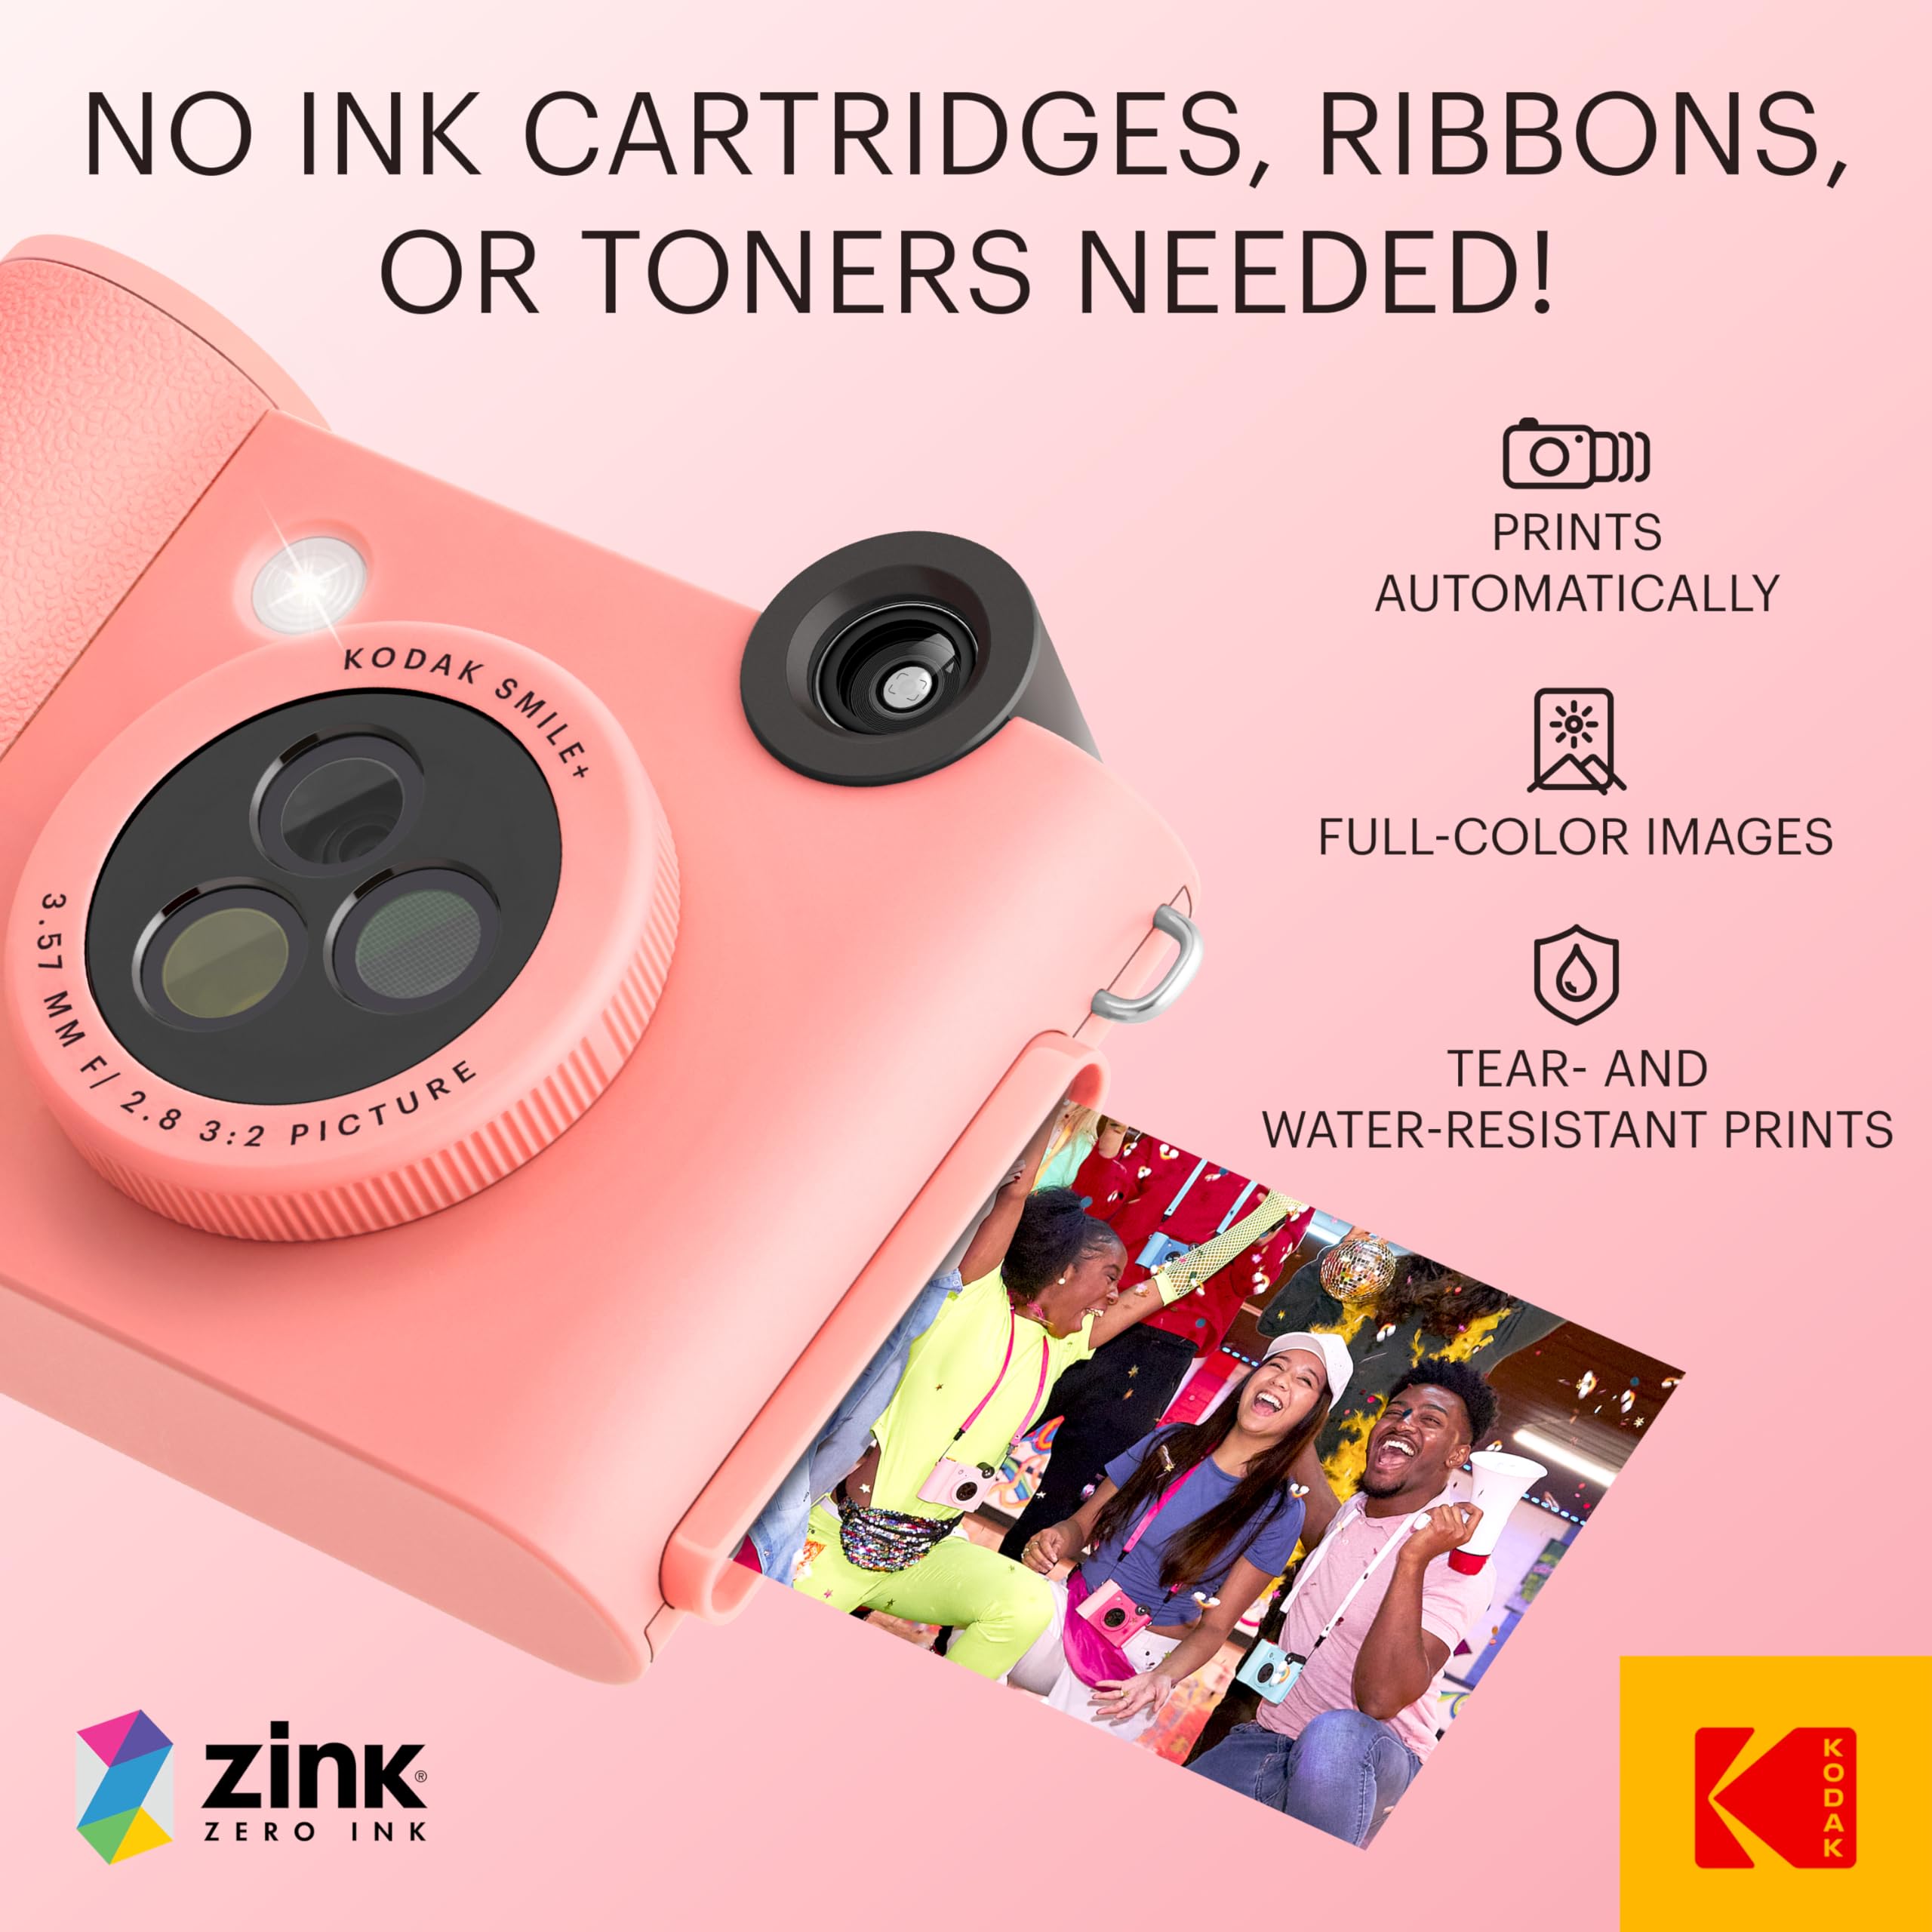 KODAK Smile+ Wireless Digital Instant Print Camera with Effect-Changing Lens, 2x3” Sticky-Backed Photo Prints, and Zink Printing Technology, Compatible with iOS and Android Devices - Pink